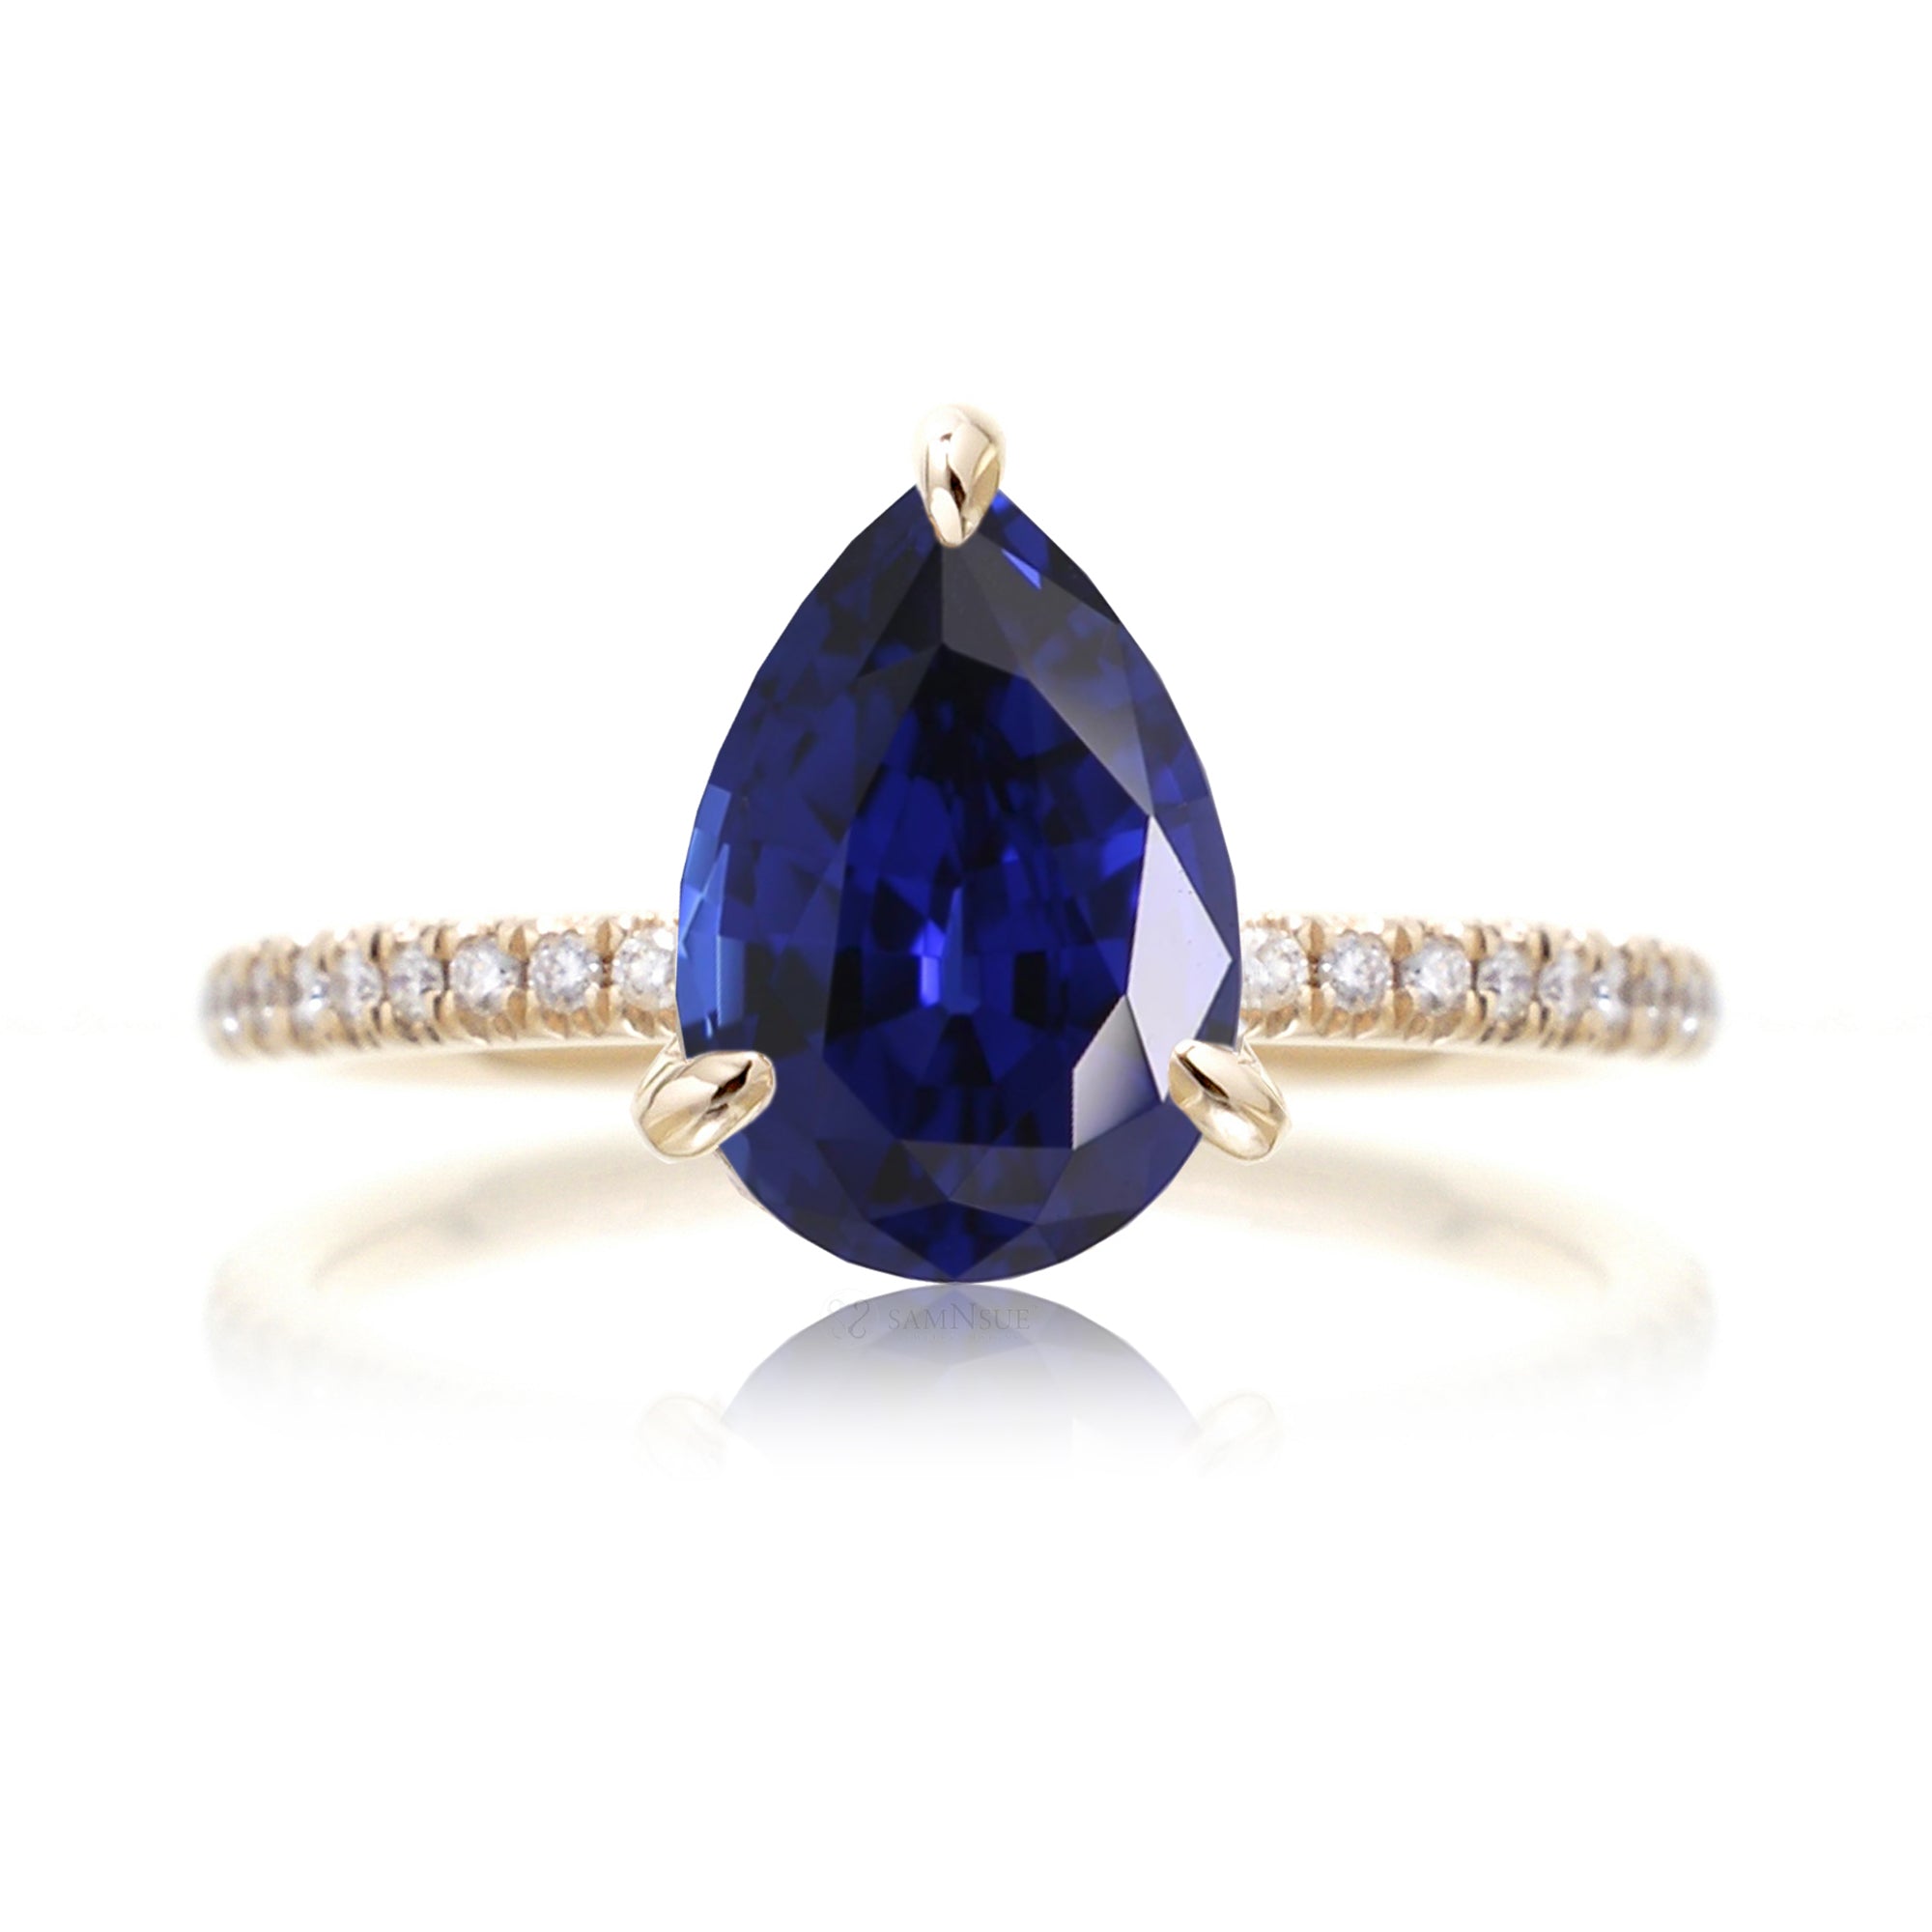 Pear cut blue sapphire diamond band engagement ring yellow gold - the Ava